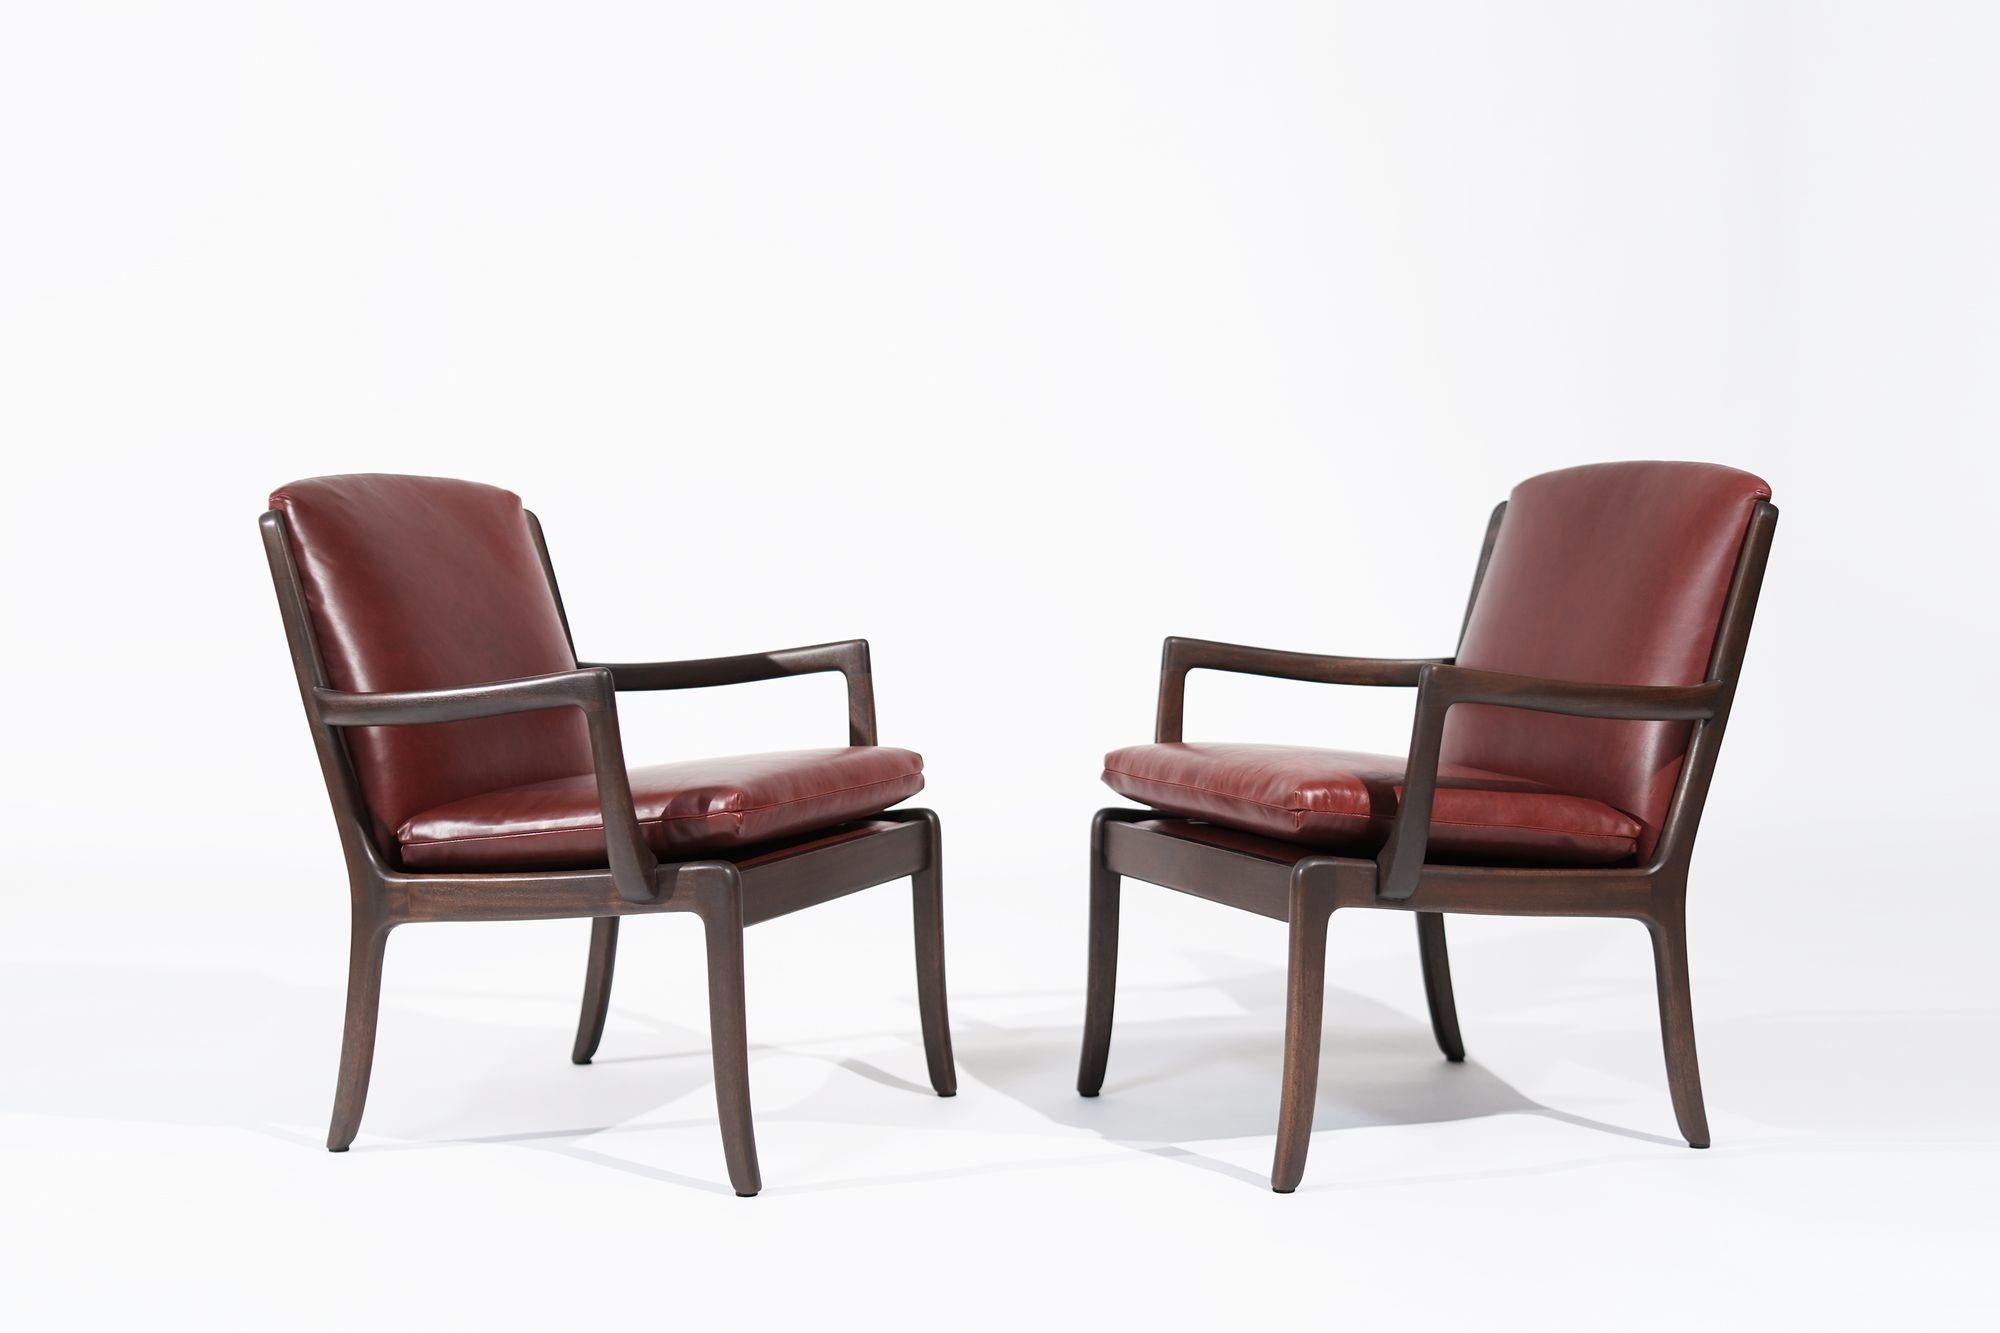 Scandinavian Modern Set of Lounge Chairs by Ole Wanscher in Sangria Leather, Denmark, C. 1960s For Sale